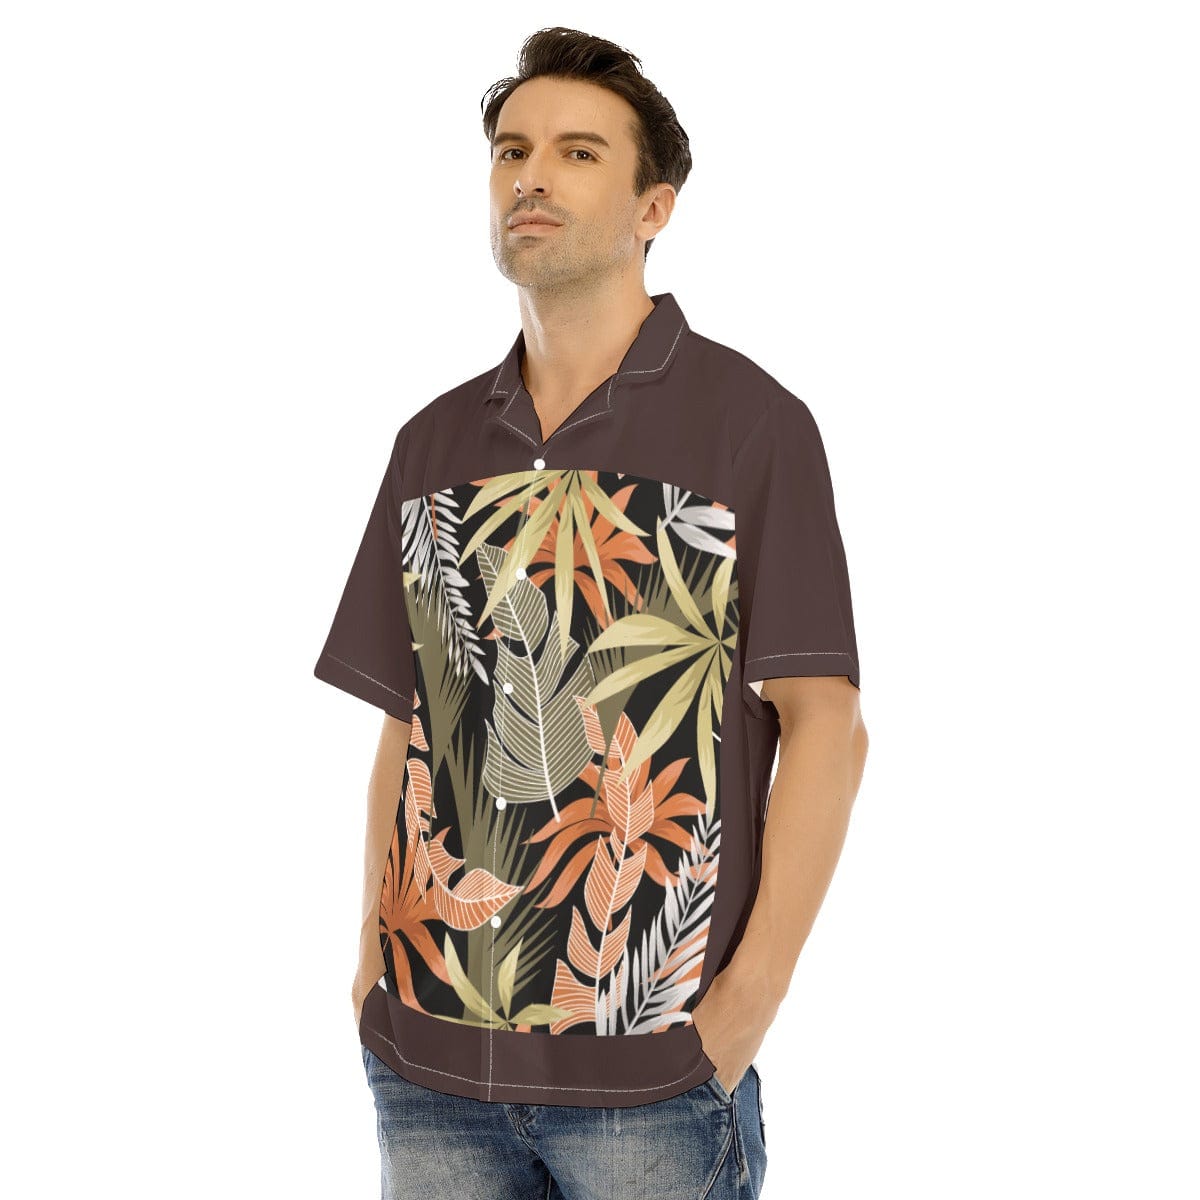 Yoycol All-Over Print Men's Hawaiian Shirt With Button Closure